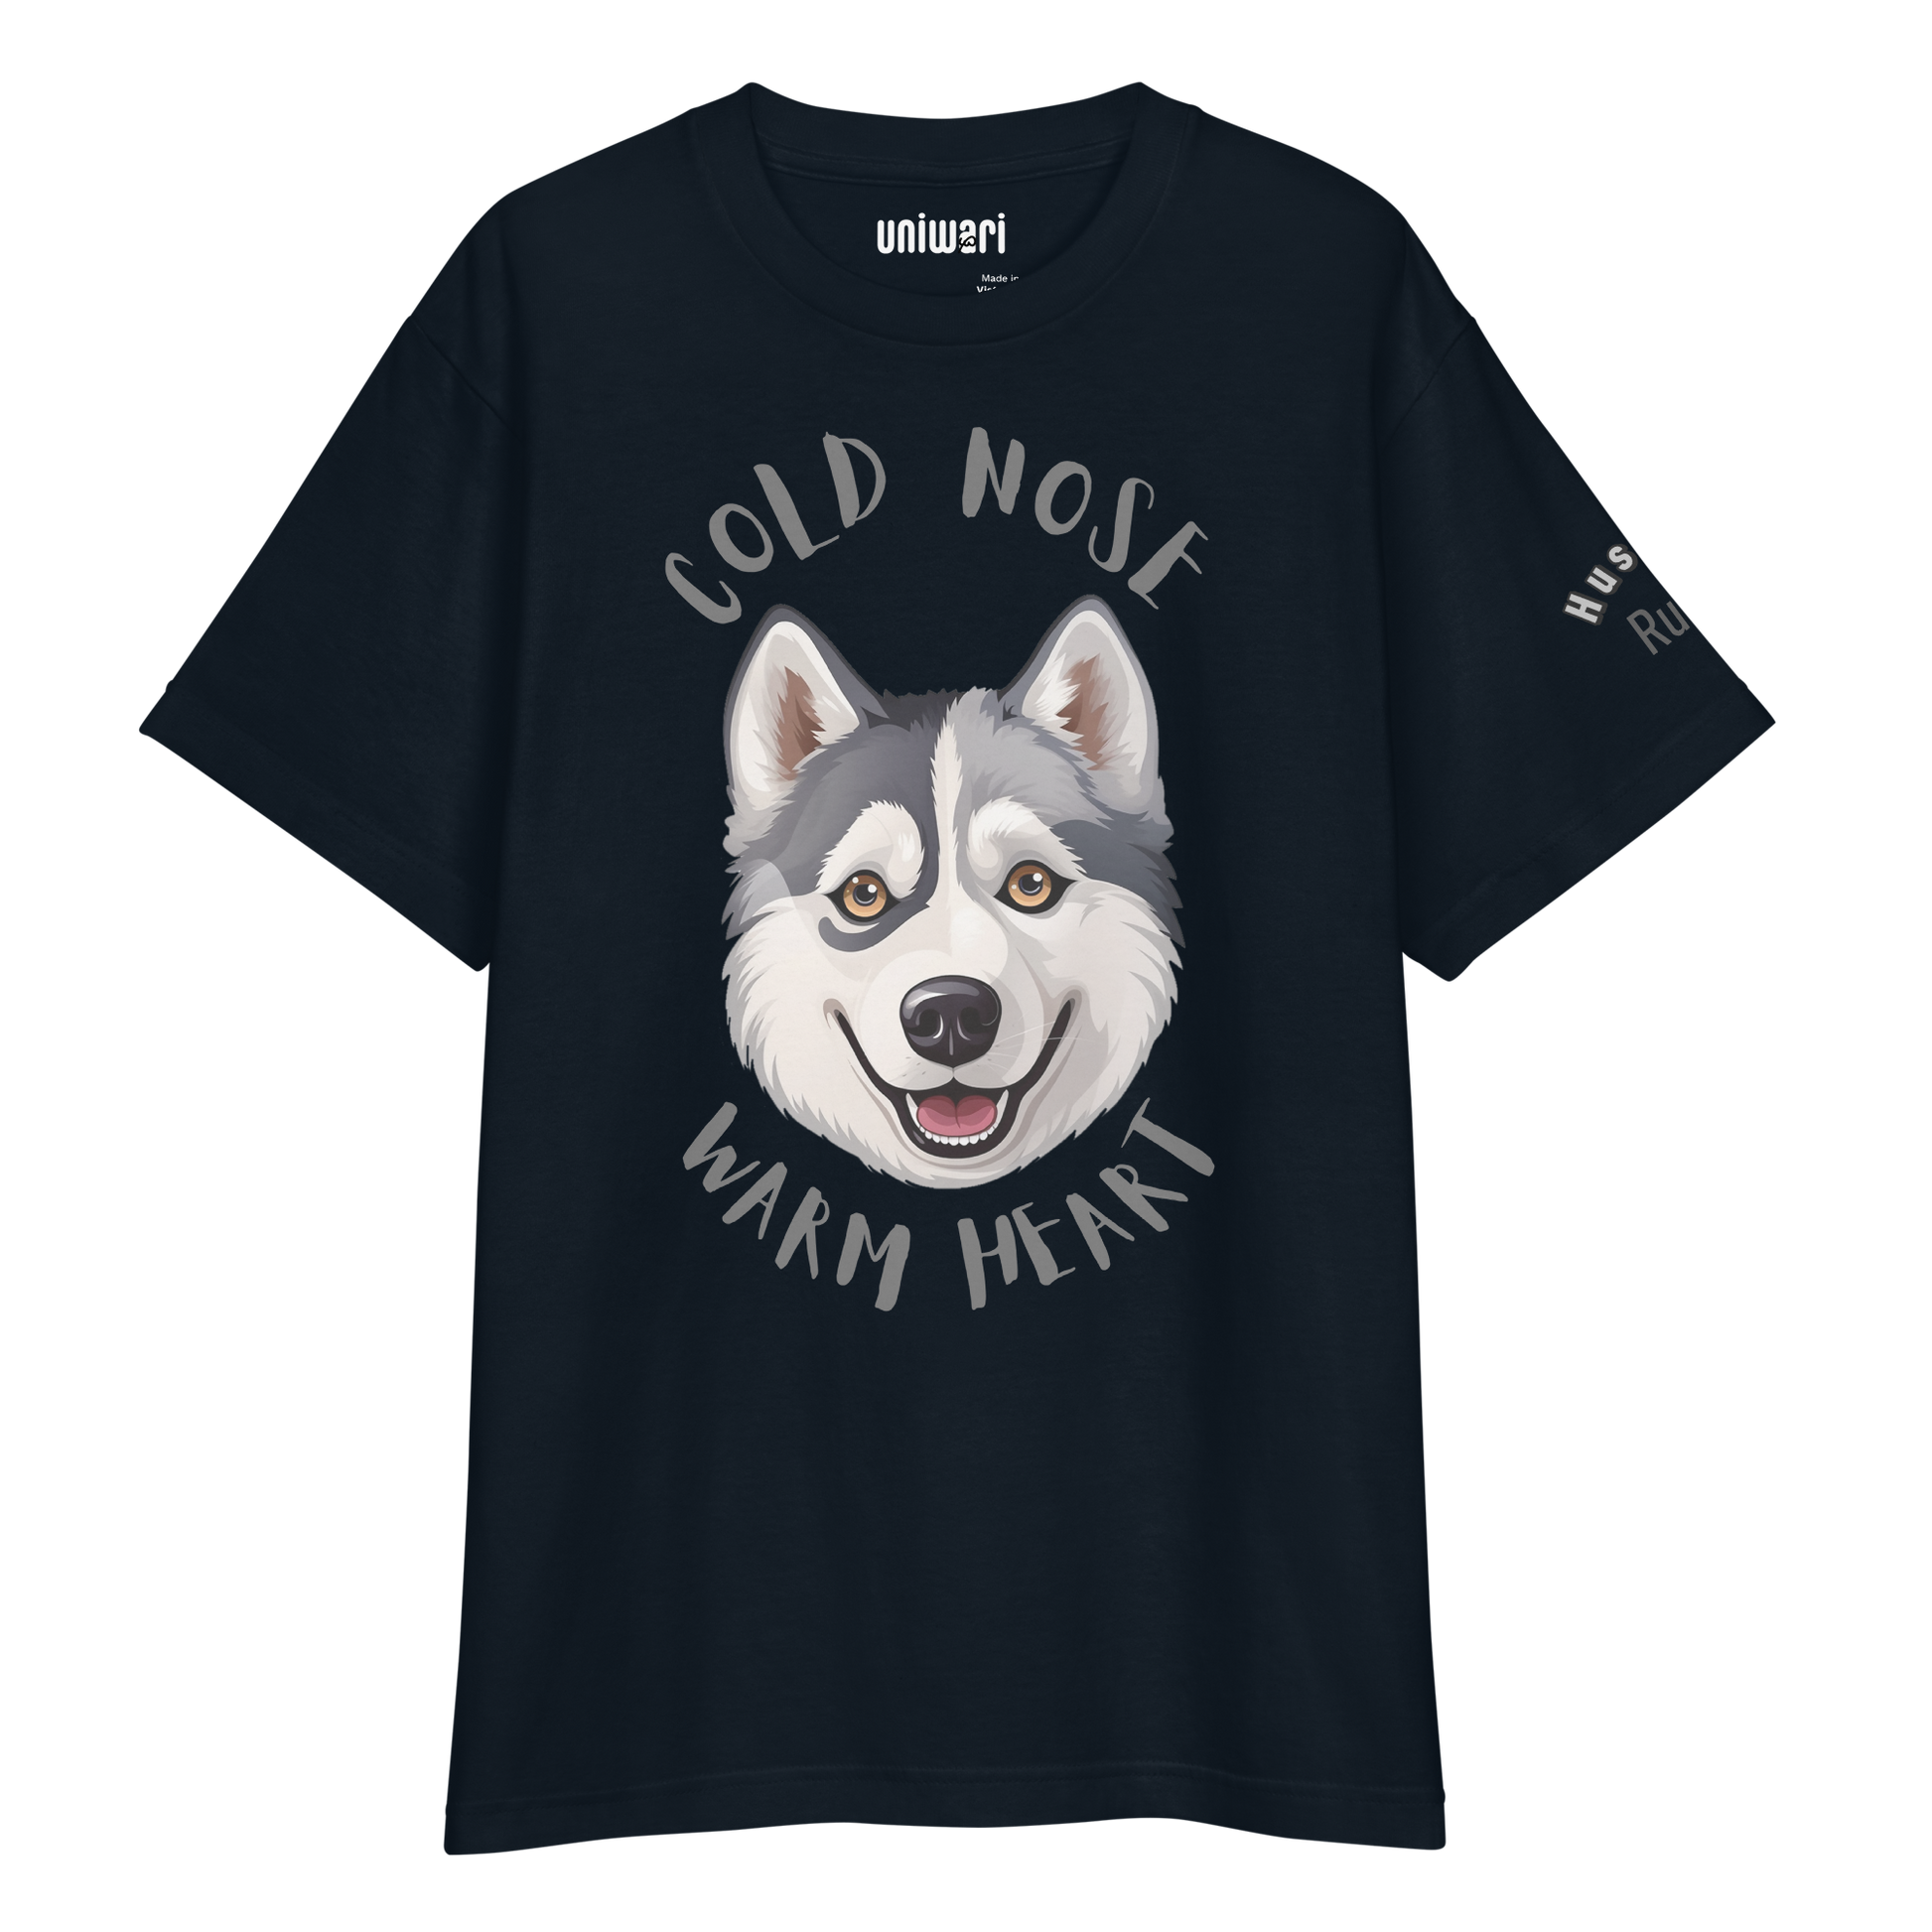 Navy High Quality Tee - Front Design with a stamp of a Husky and the phrase "cold nose warm heart" - Left Shoulder with phrase "Husky Rules"